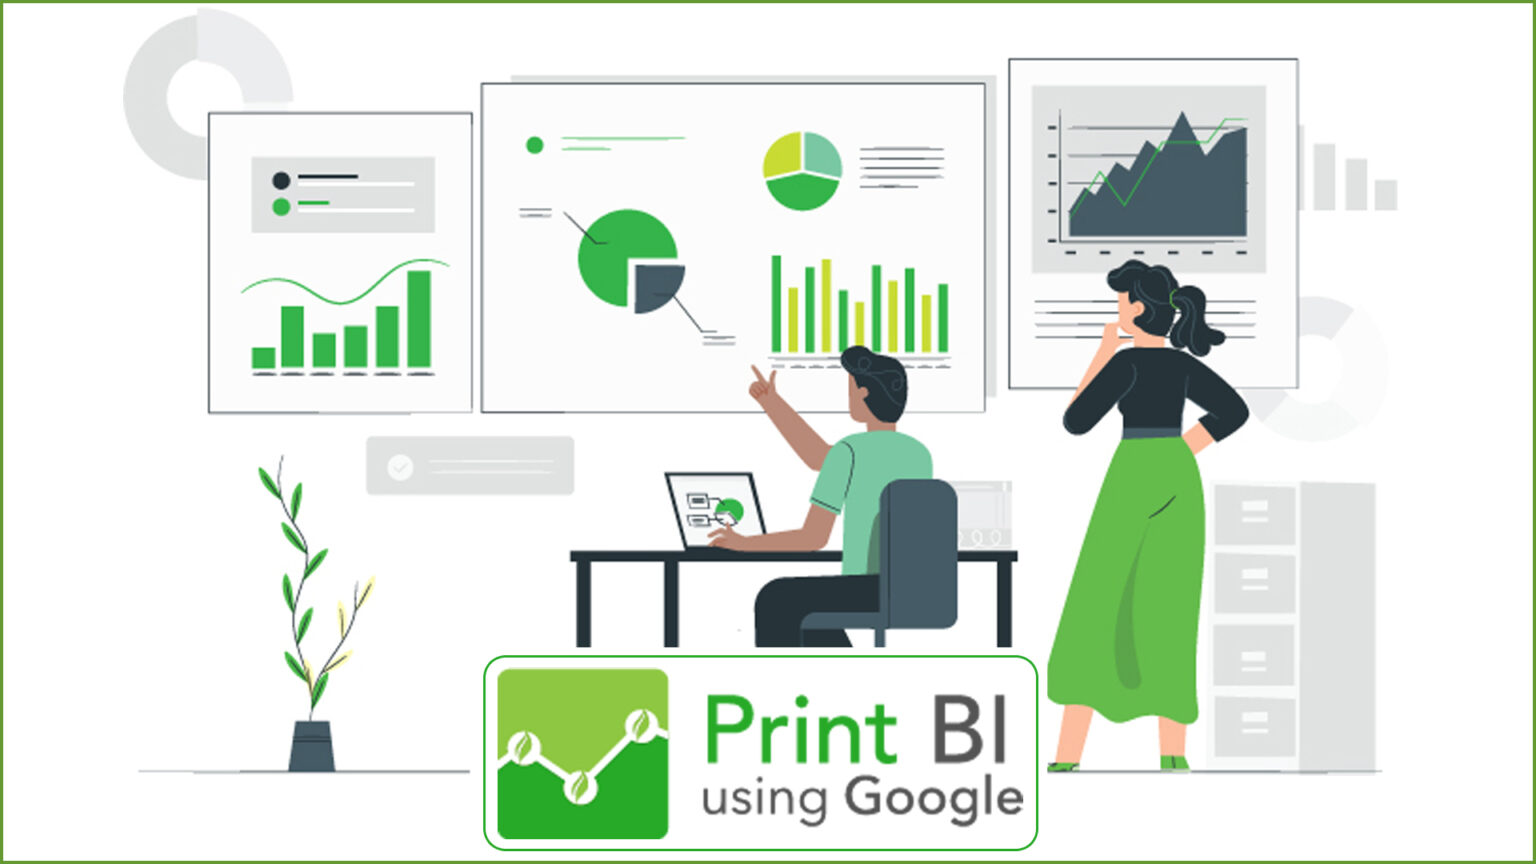 ecoprintQ’s is Proud to announce our 1st Add-On: Print BI using Google